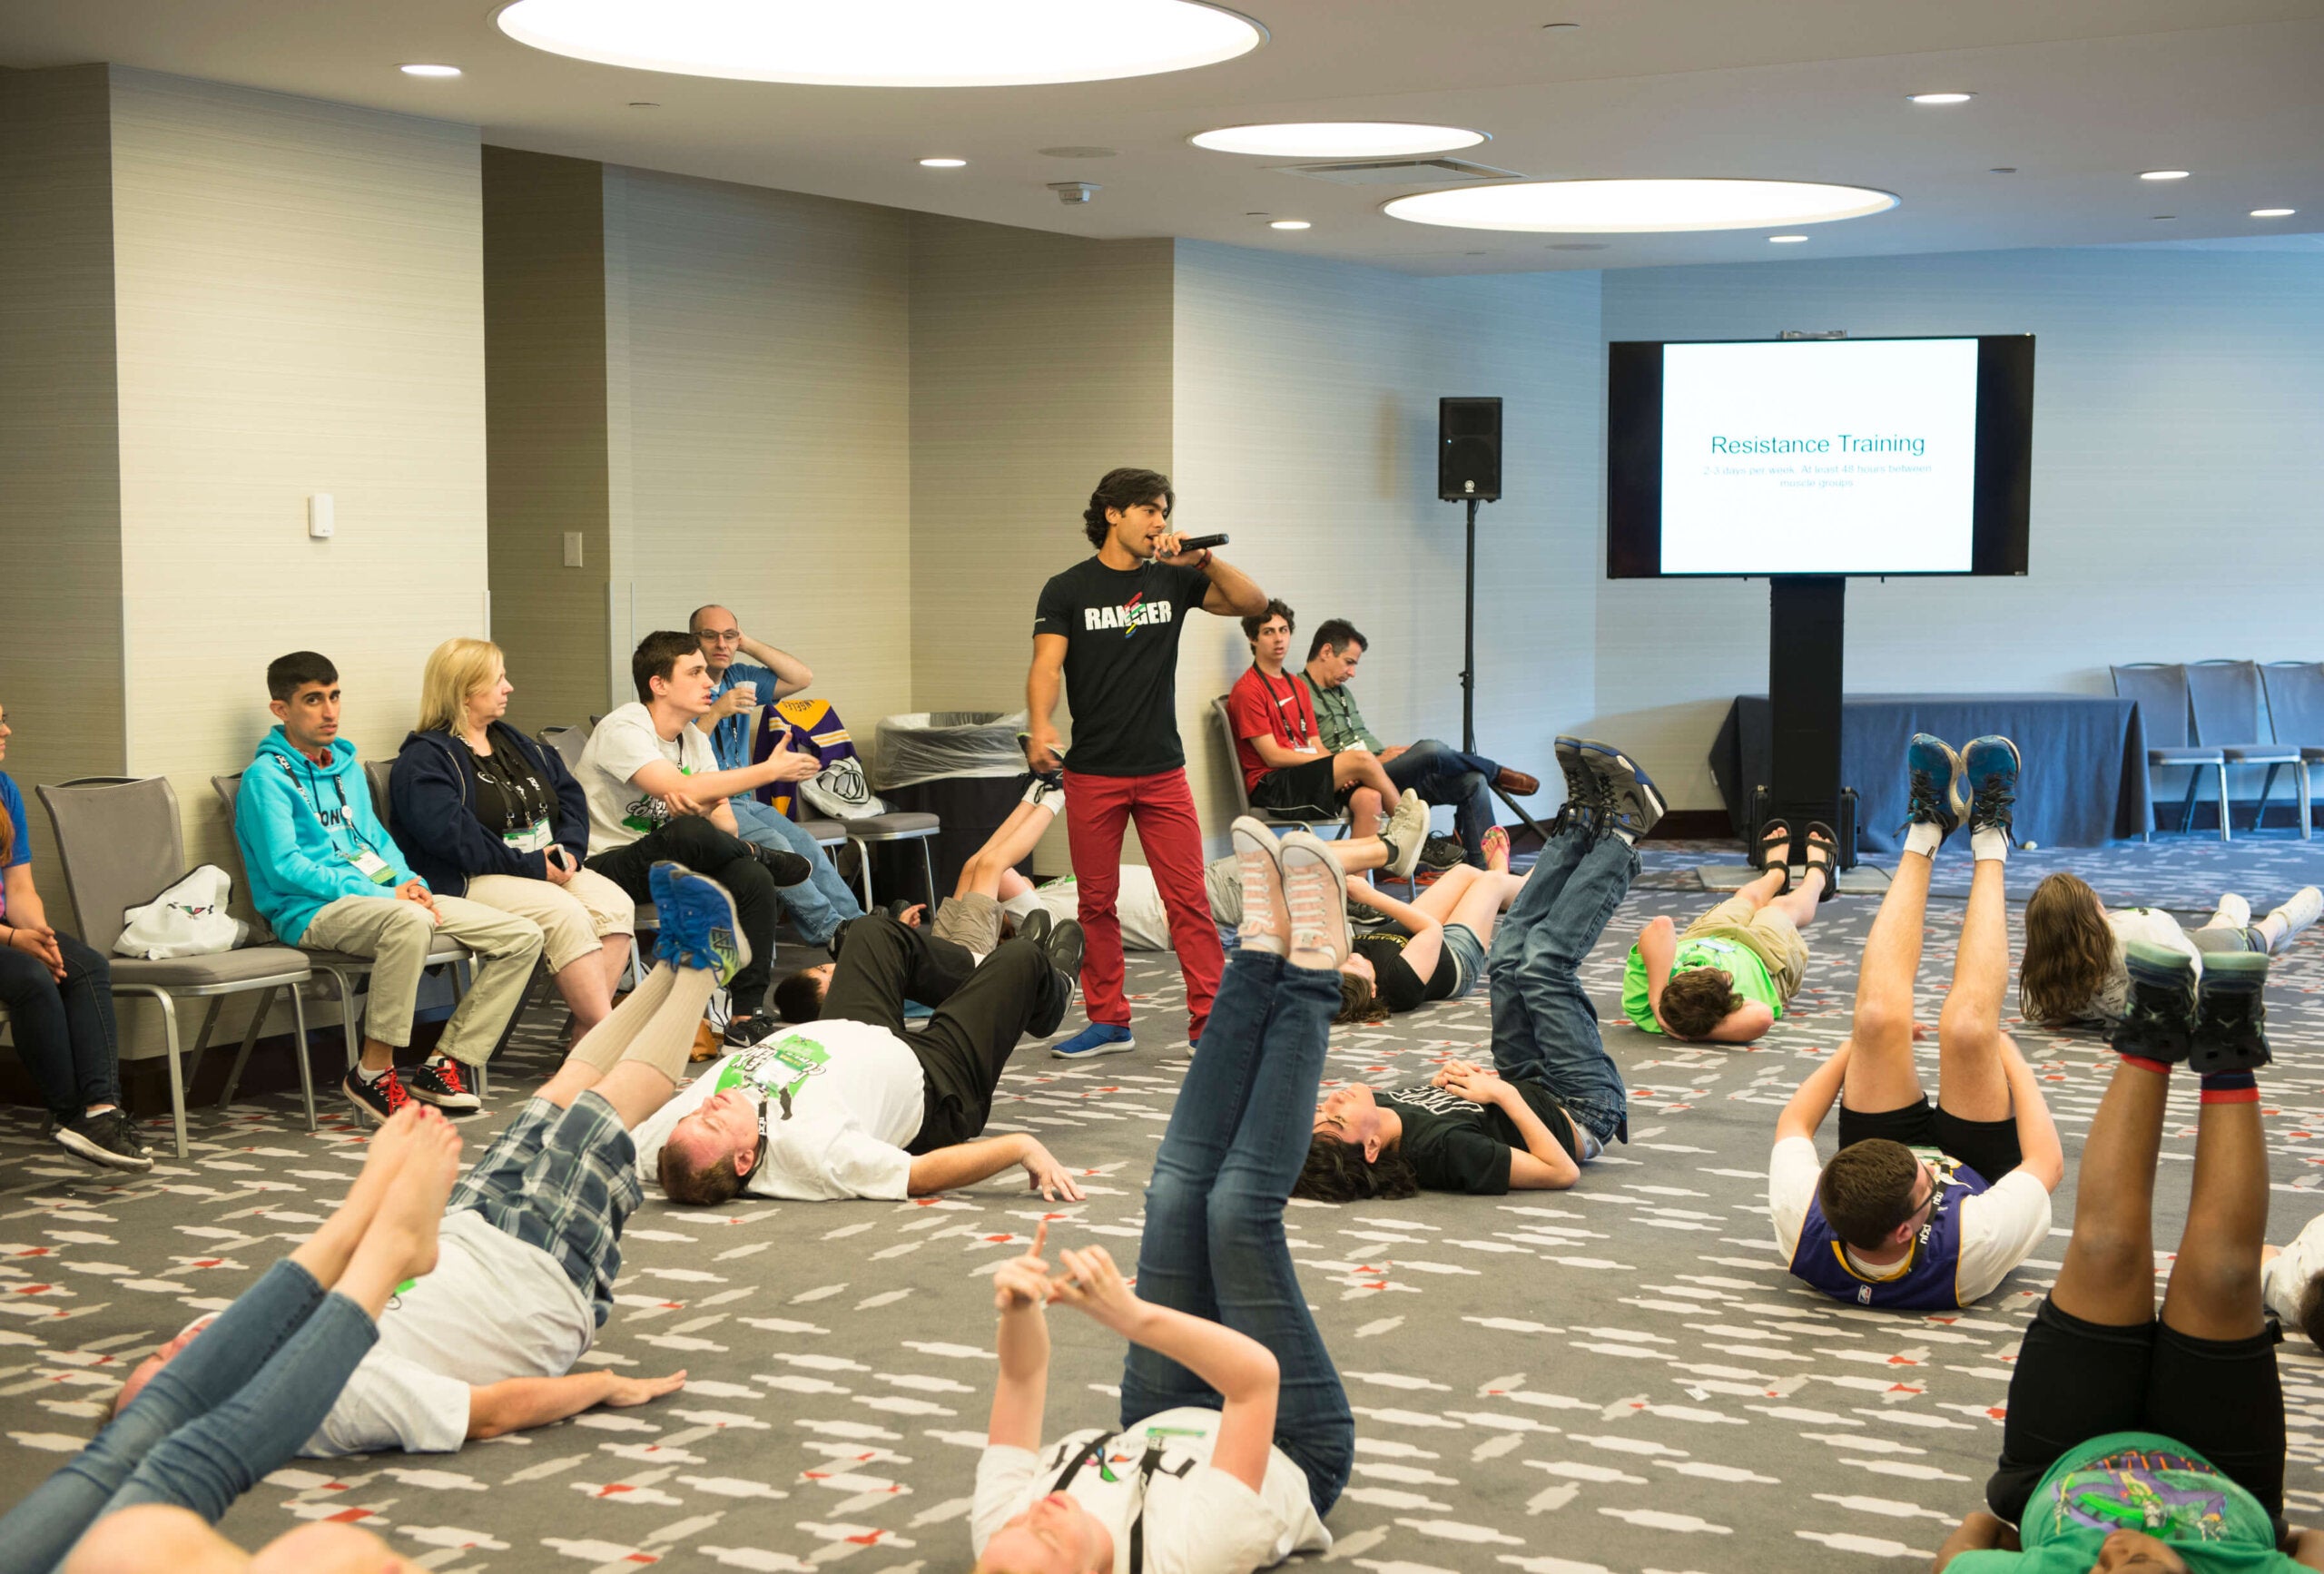 Brennan Mejia teaches an exercise session at the NFXF Conference